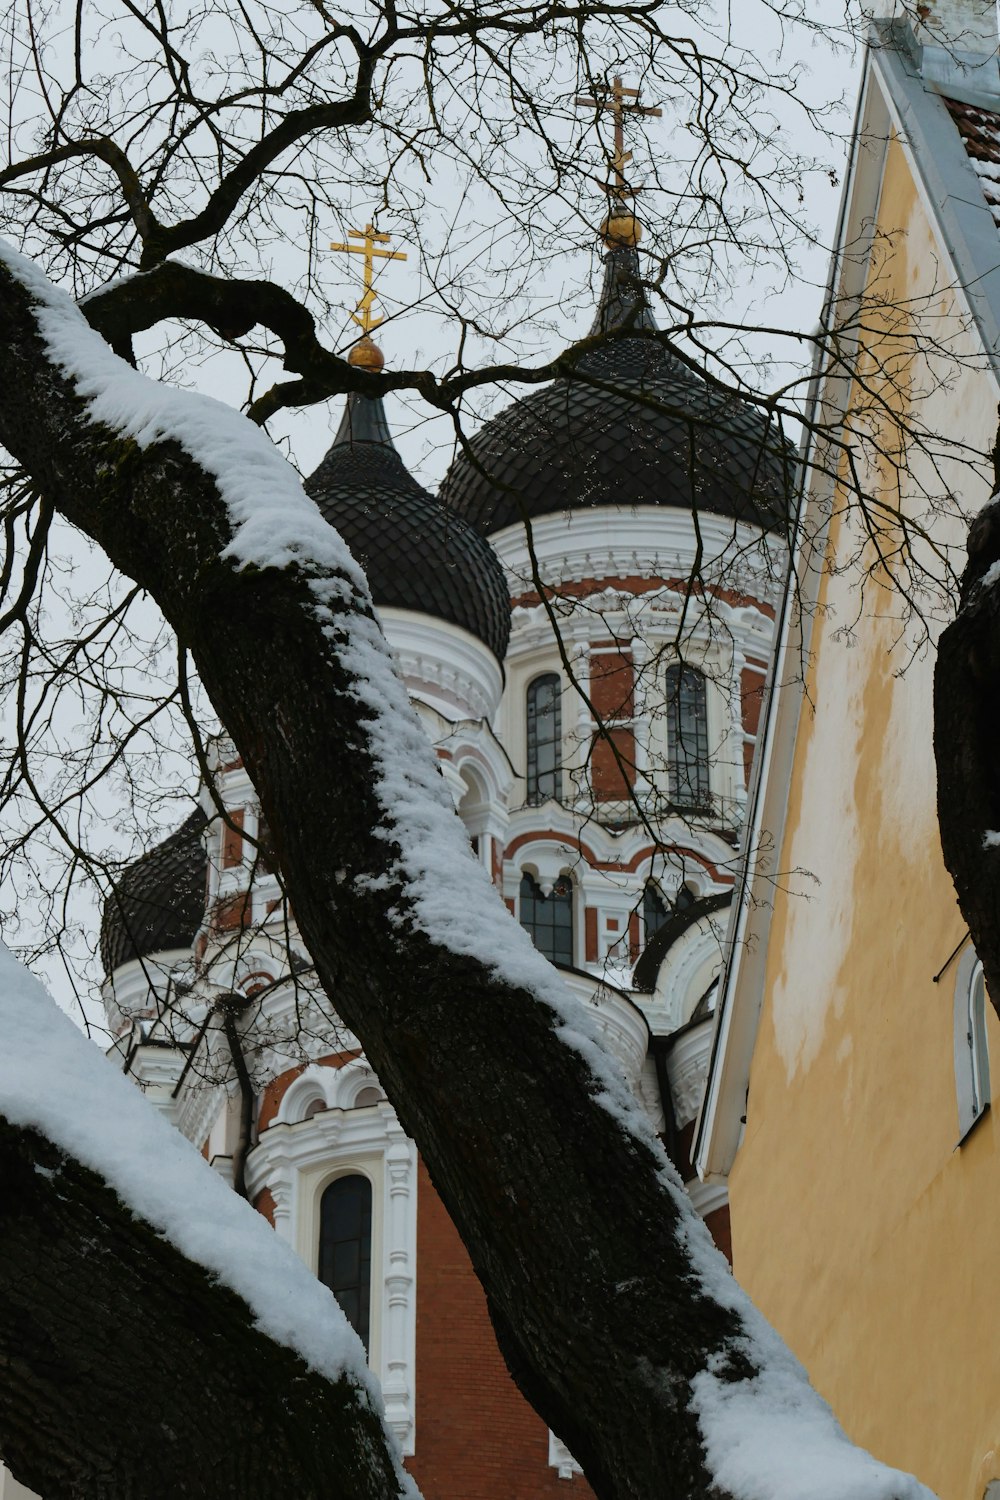 a church with a steeple covered in snow